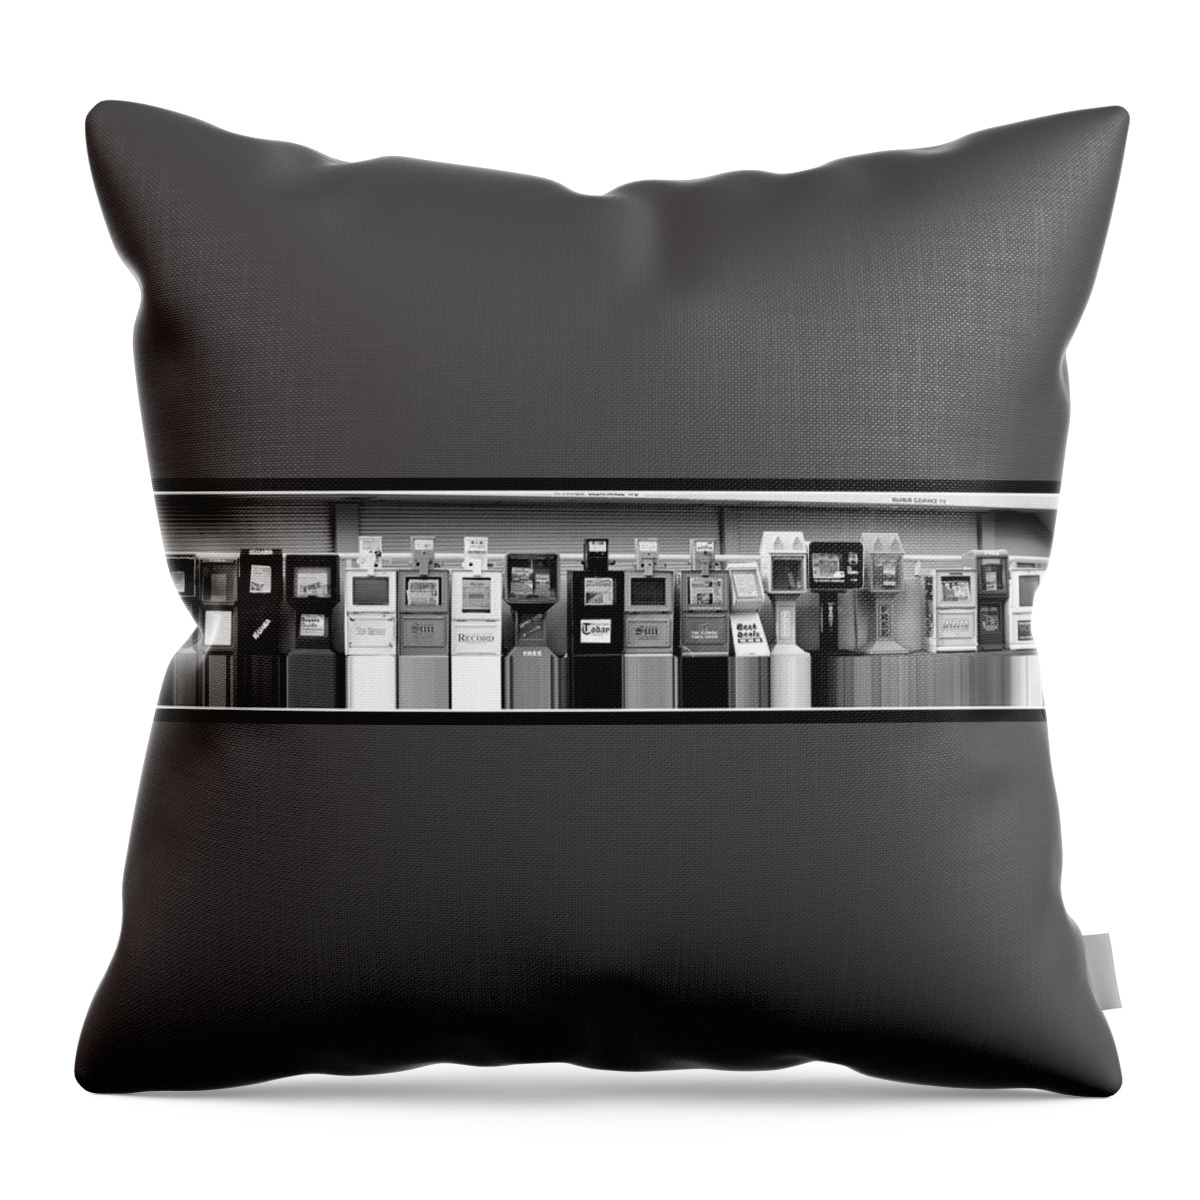 News Throw Pillow featuring the photograph News Stands by Farol Tomson